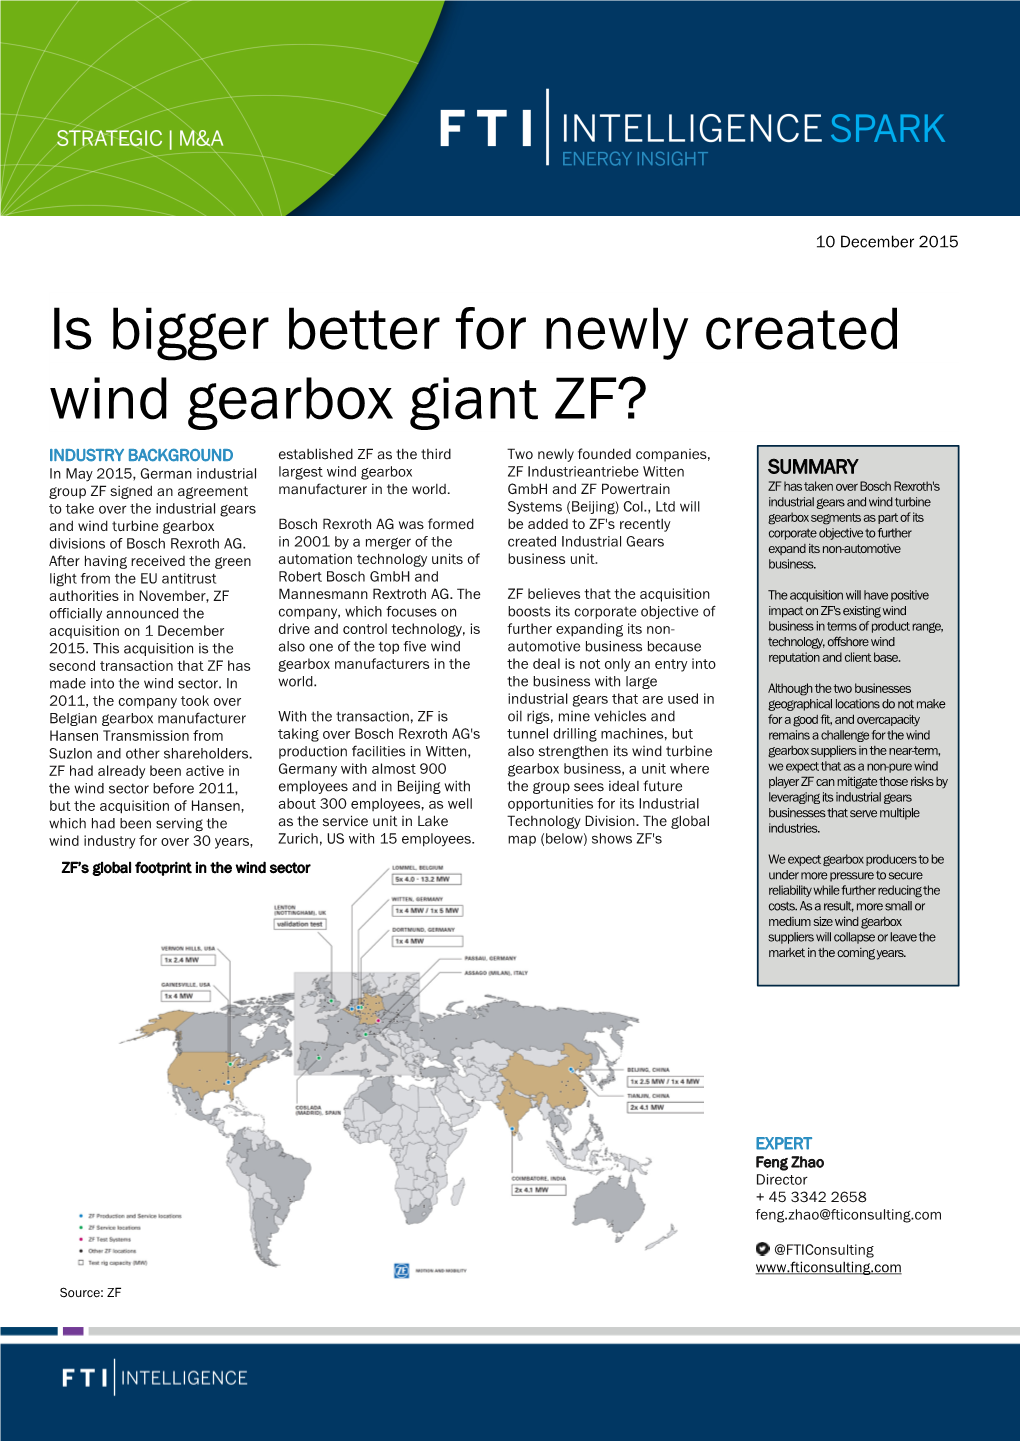 Is Bigger Better for Newly Created Wind Gearbox Giant